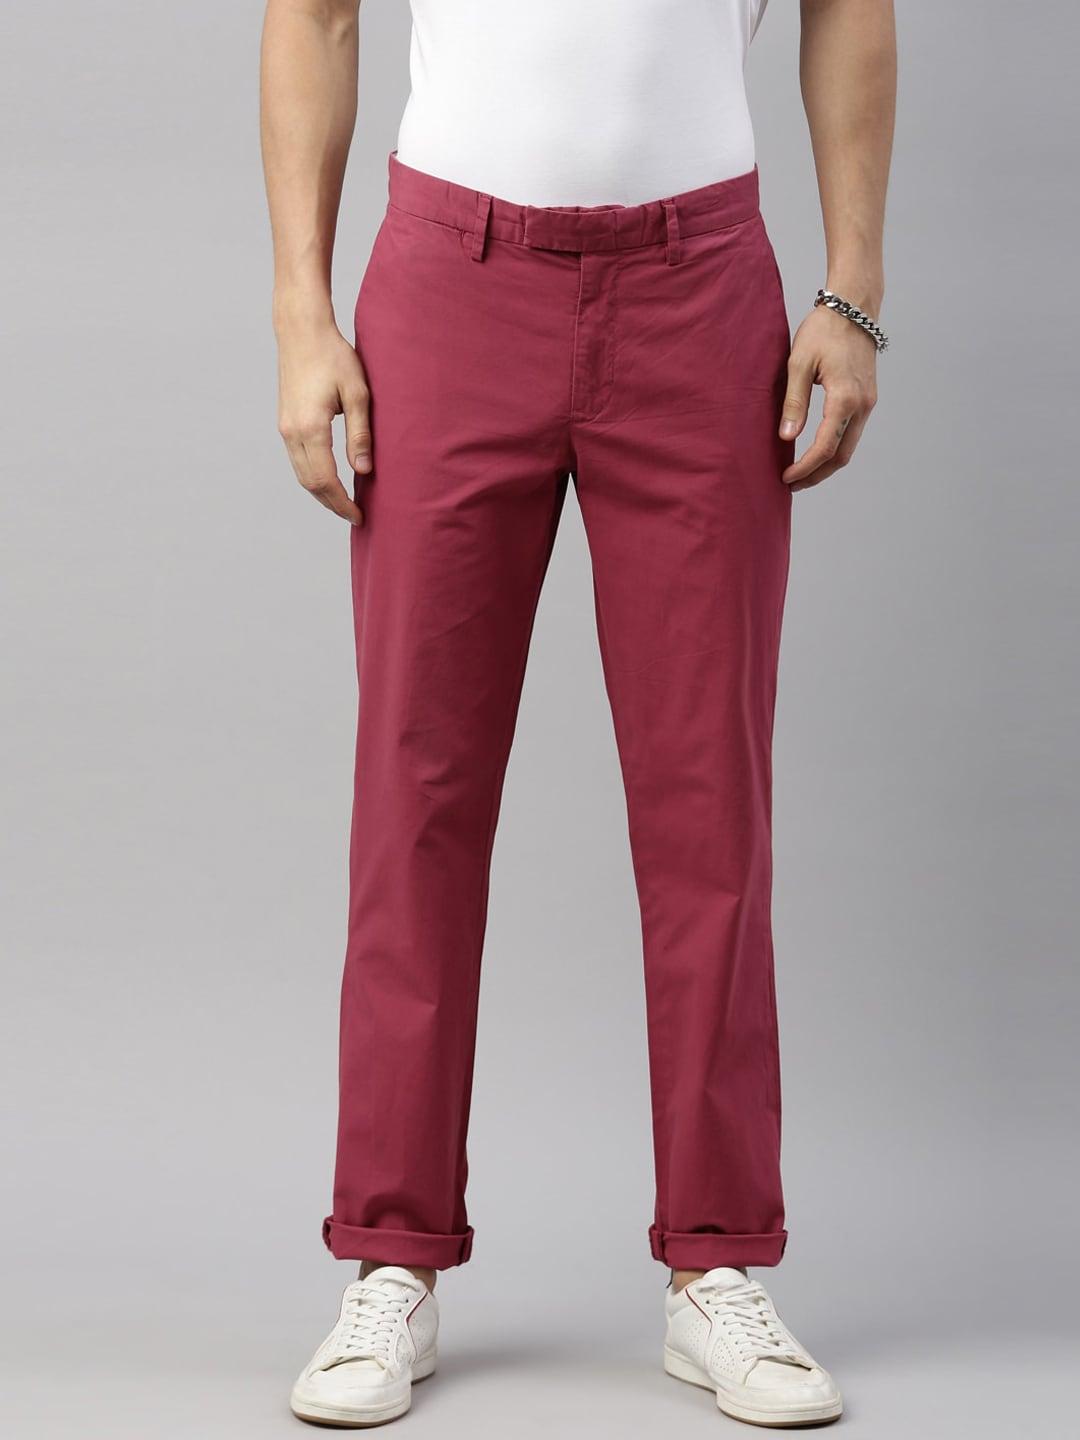 breakbounce-men-red-solid-comfort-fit-100%-cotton-trousers